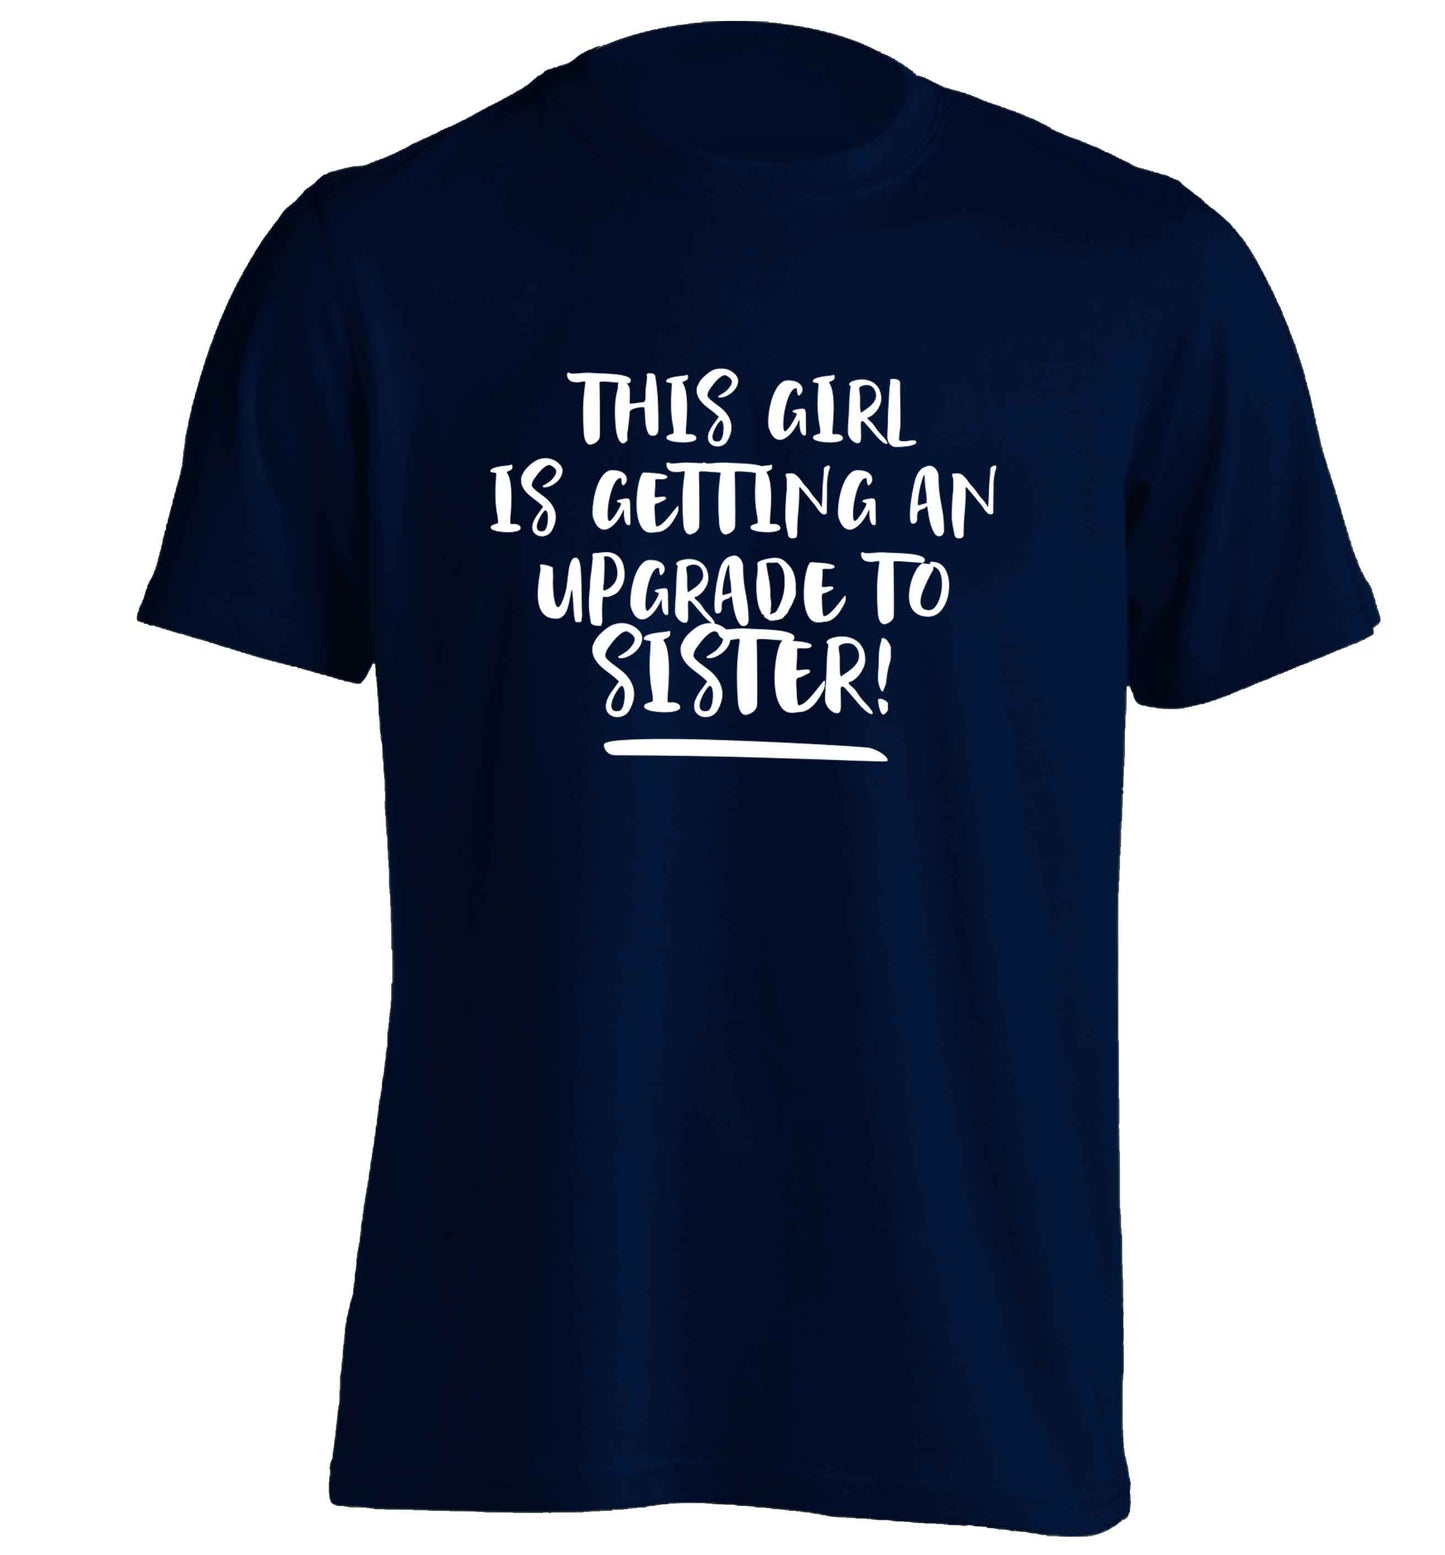 This girl is getting an upgrade to sister! adults unisex navy Tshirt 2XL